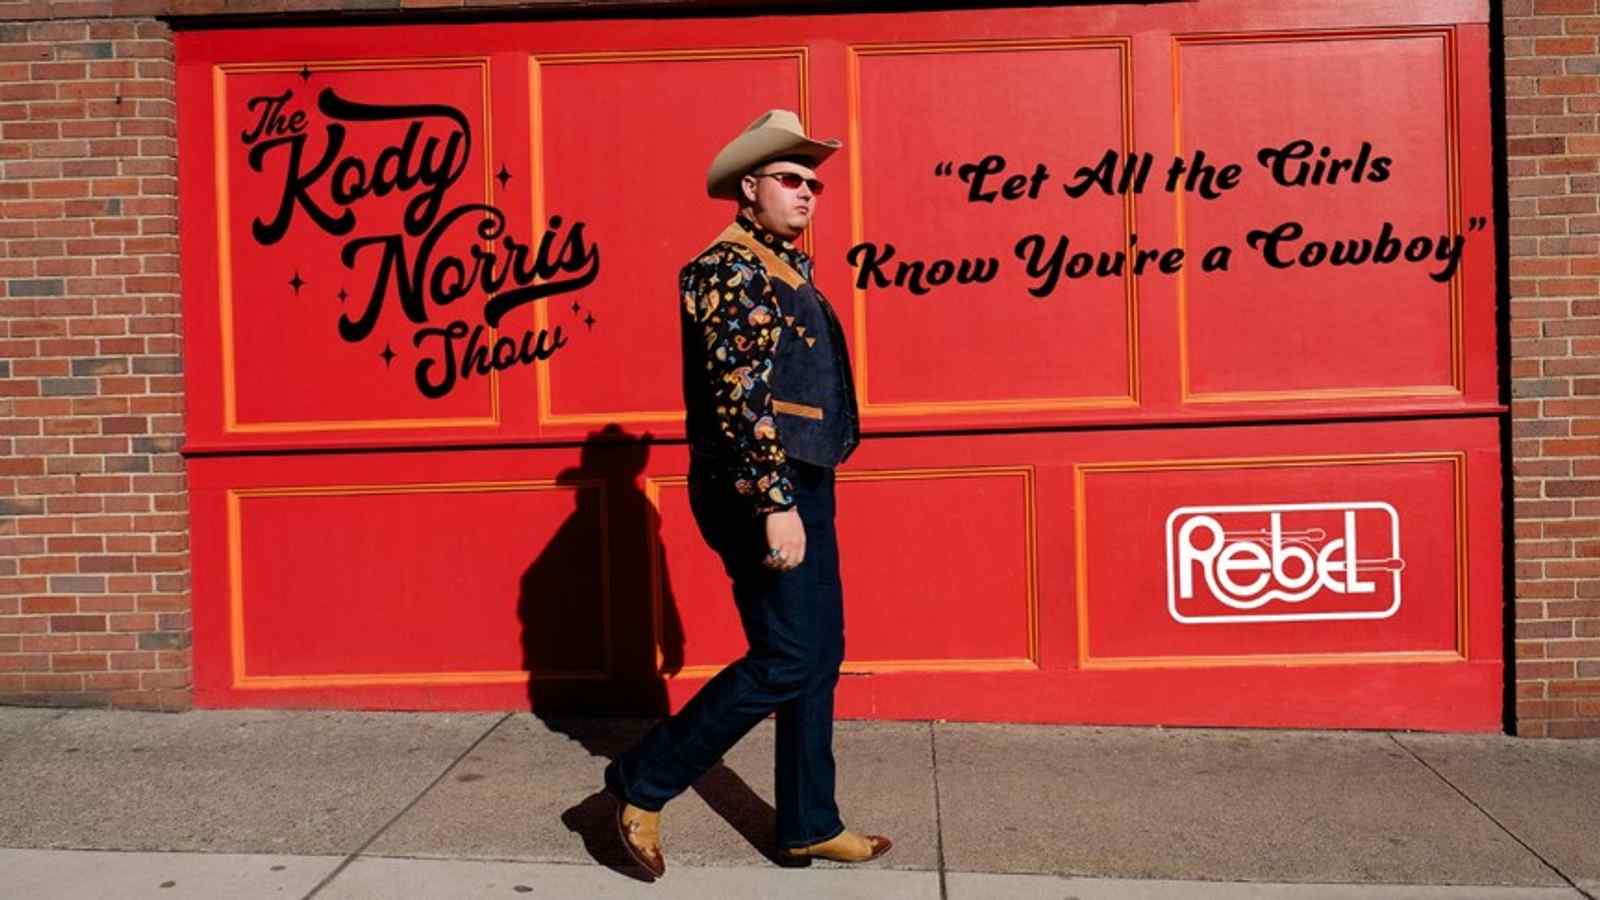 THE KODY NORRIS SHOW RELEASES NEW VIDEO for "Let All The Girls Know You're A Cowboy"